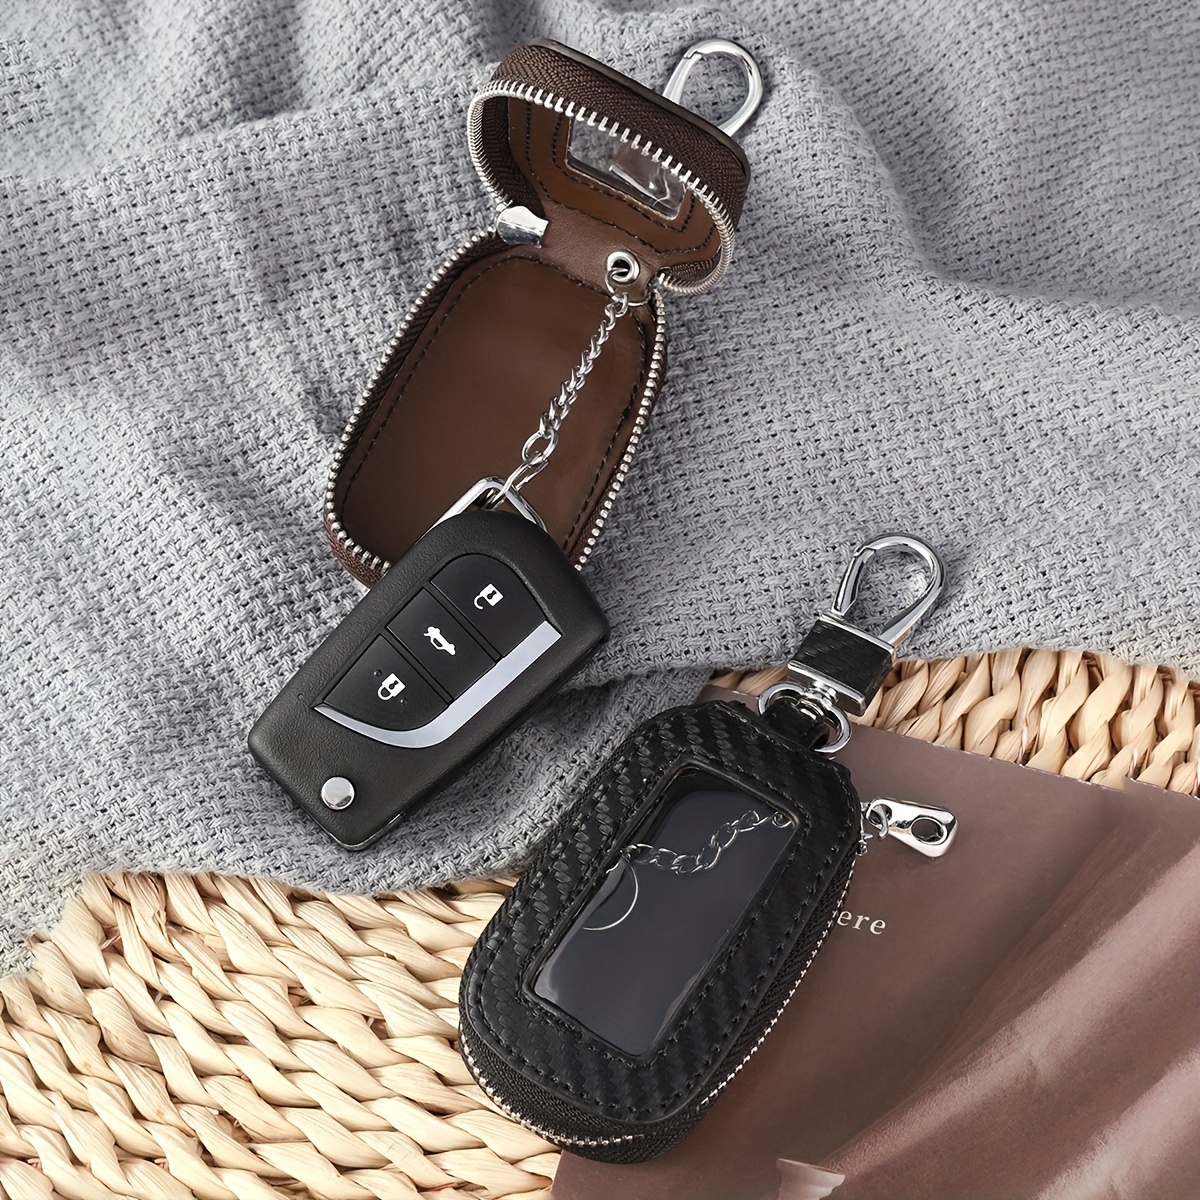 

1pcs Premium Pu Leather Key Fob Case, Universal Car Key Holder With Zipper Closure, Scratch-resistant, Unisex Key Protector Shell For All Vehicle Keys